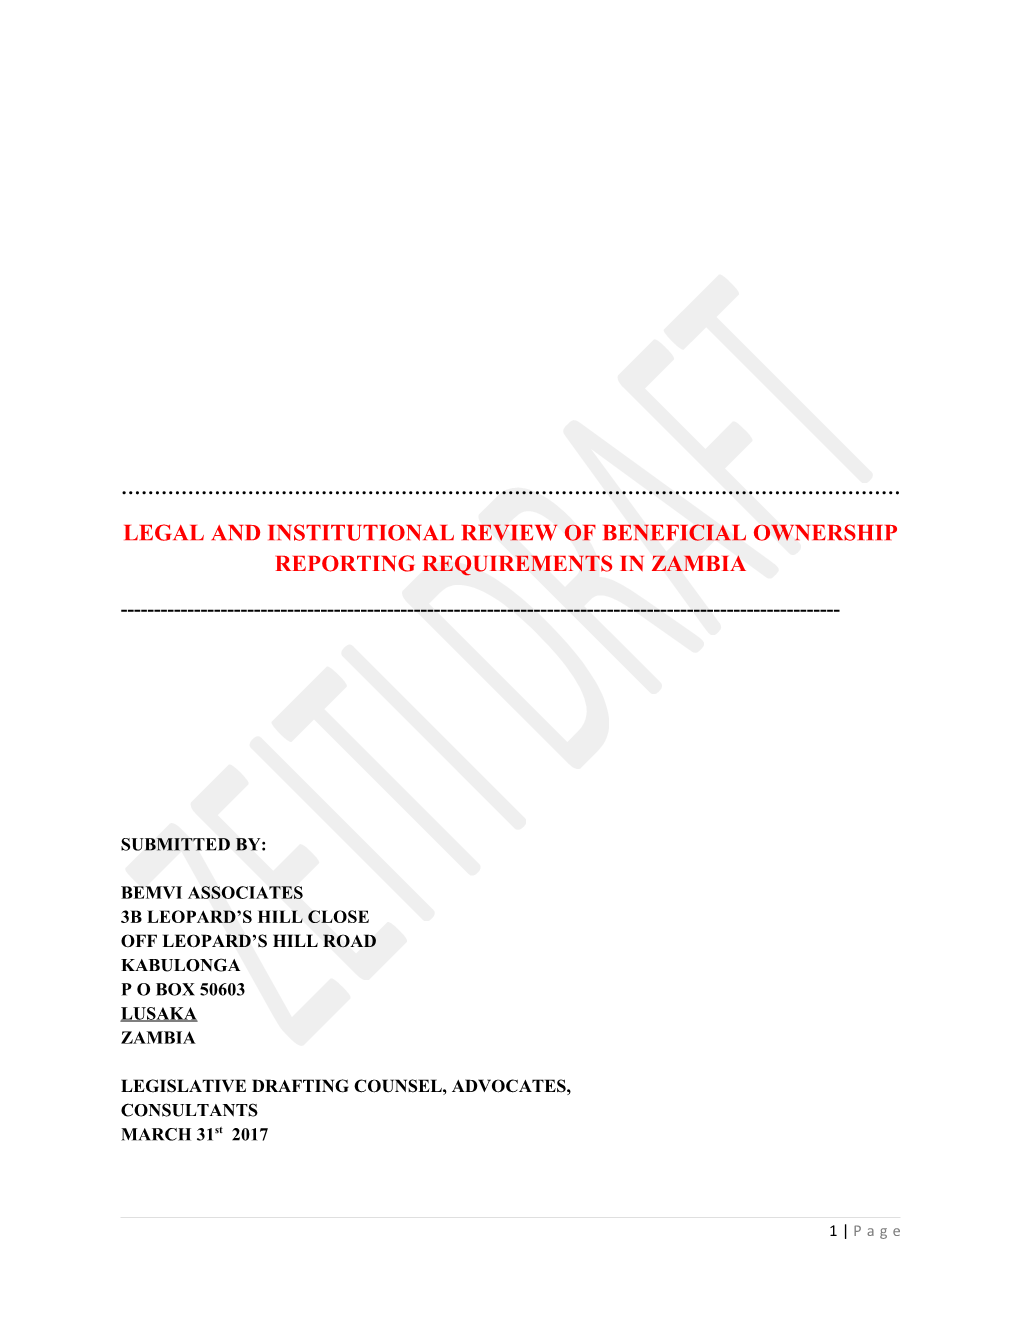 Legal and Institutional Review of Beneficial Ownership Reporting Requirements in Zambia